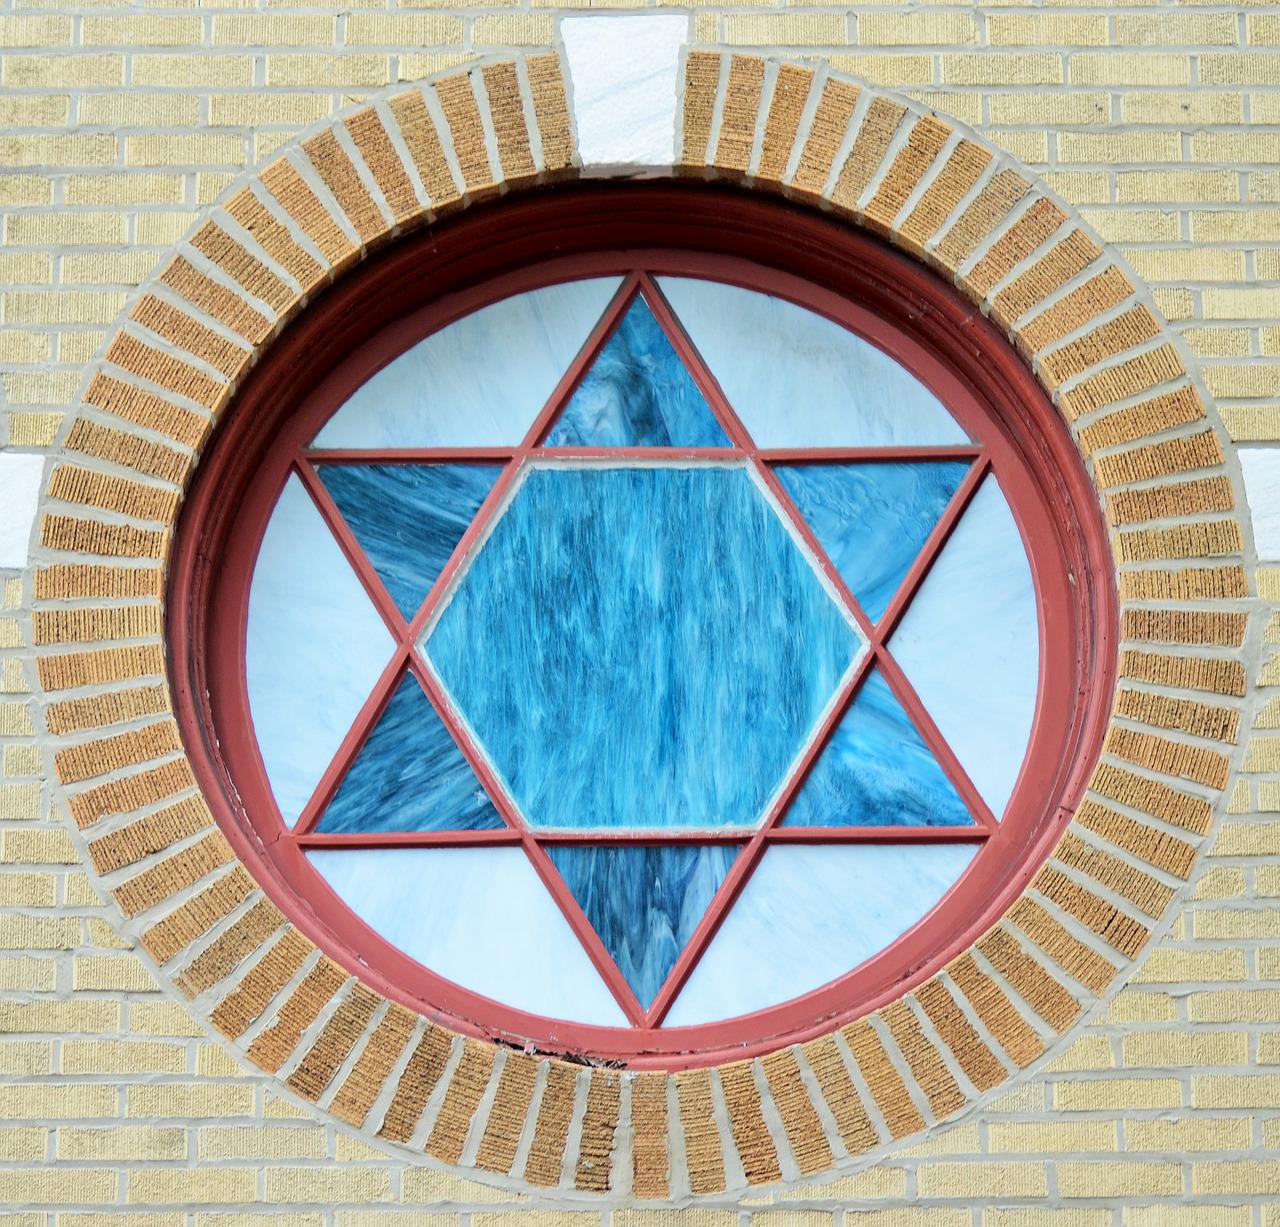 a circular window with a star of david on it.